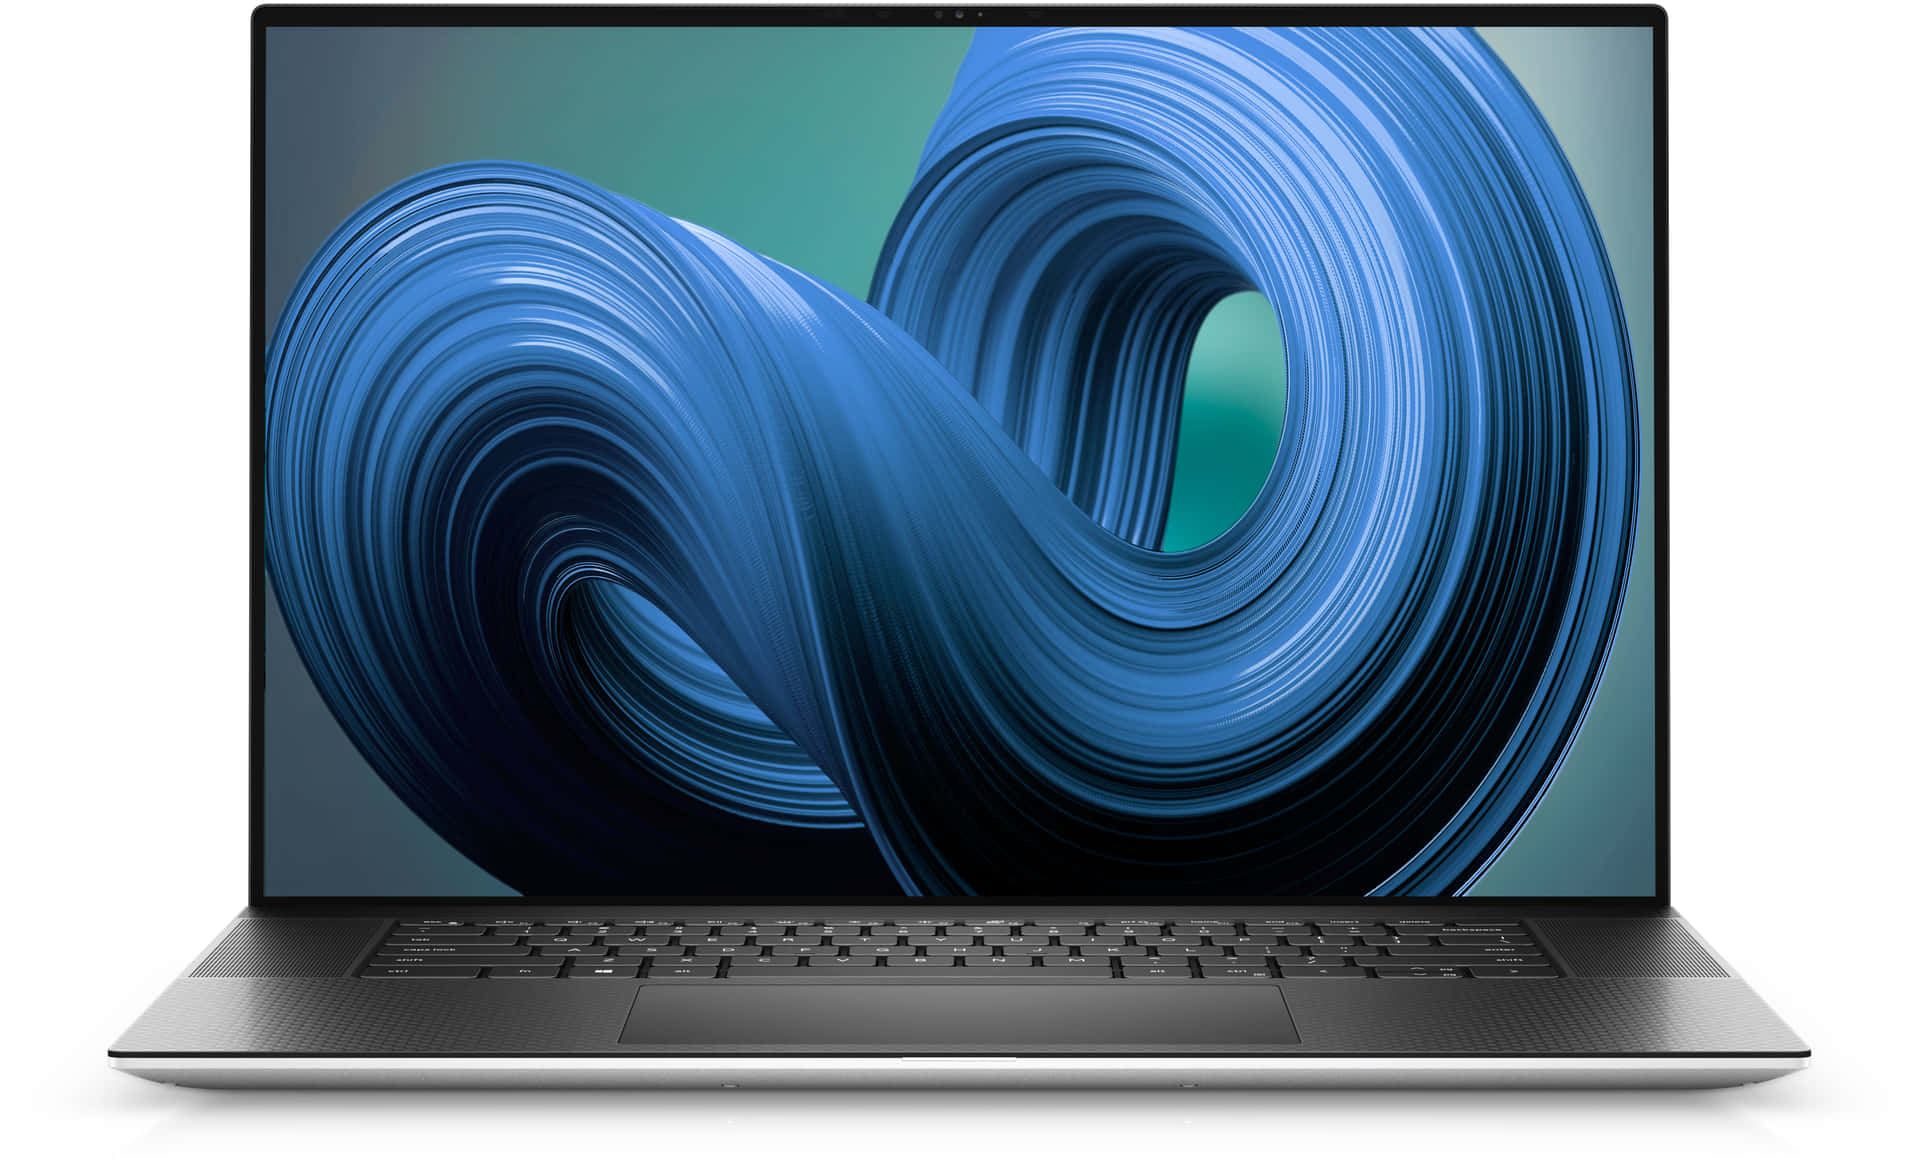 Get the best out of your device with Dell.